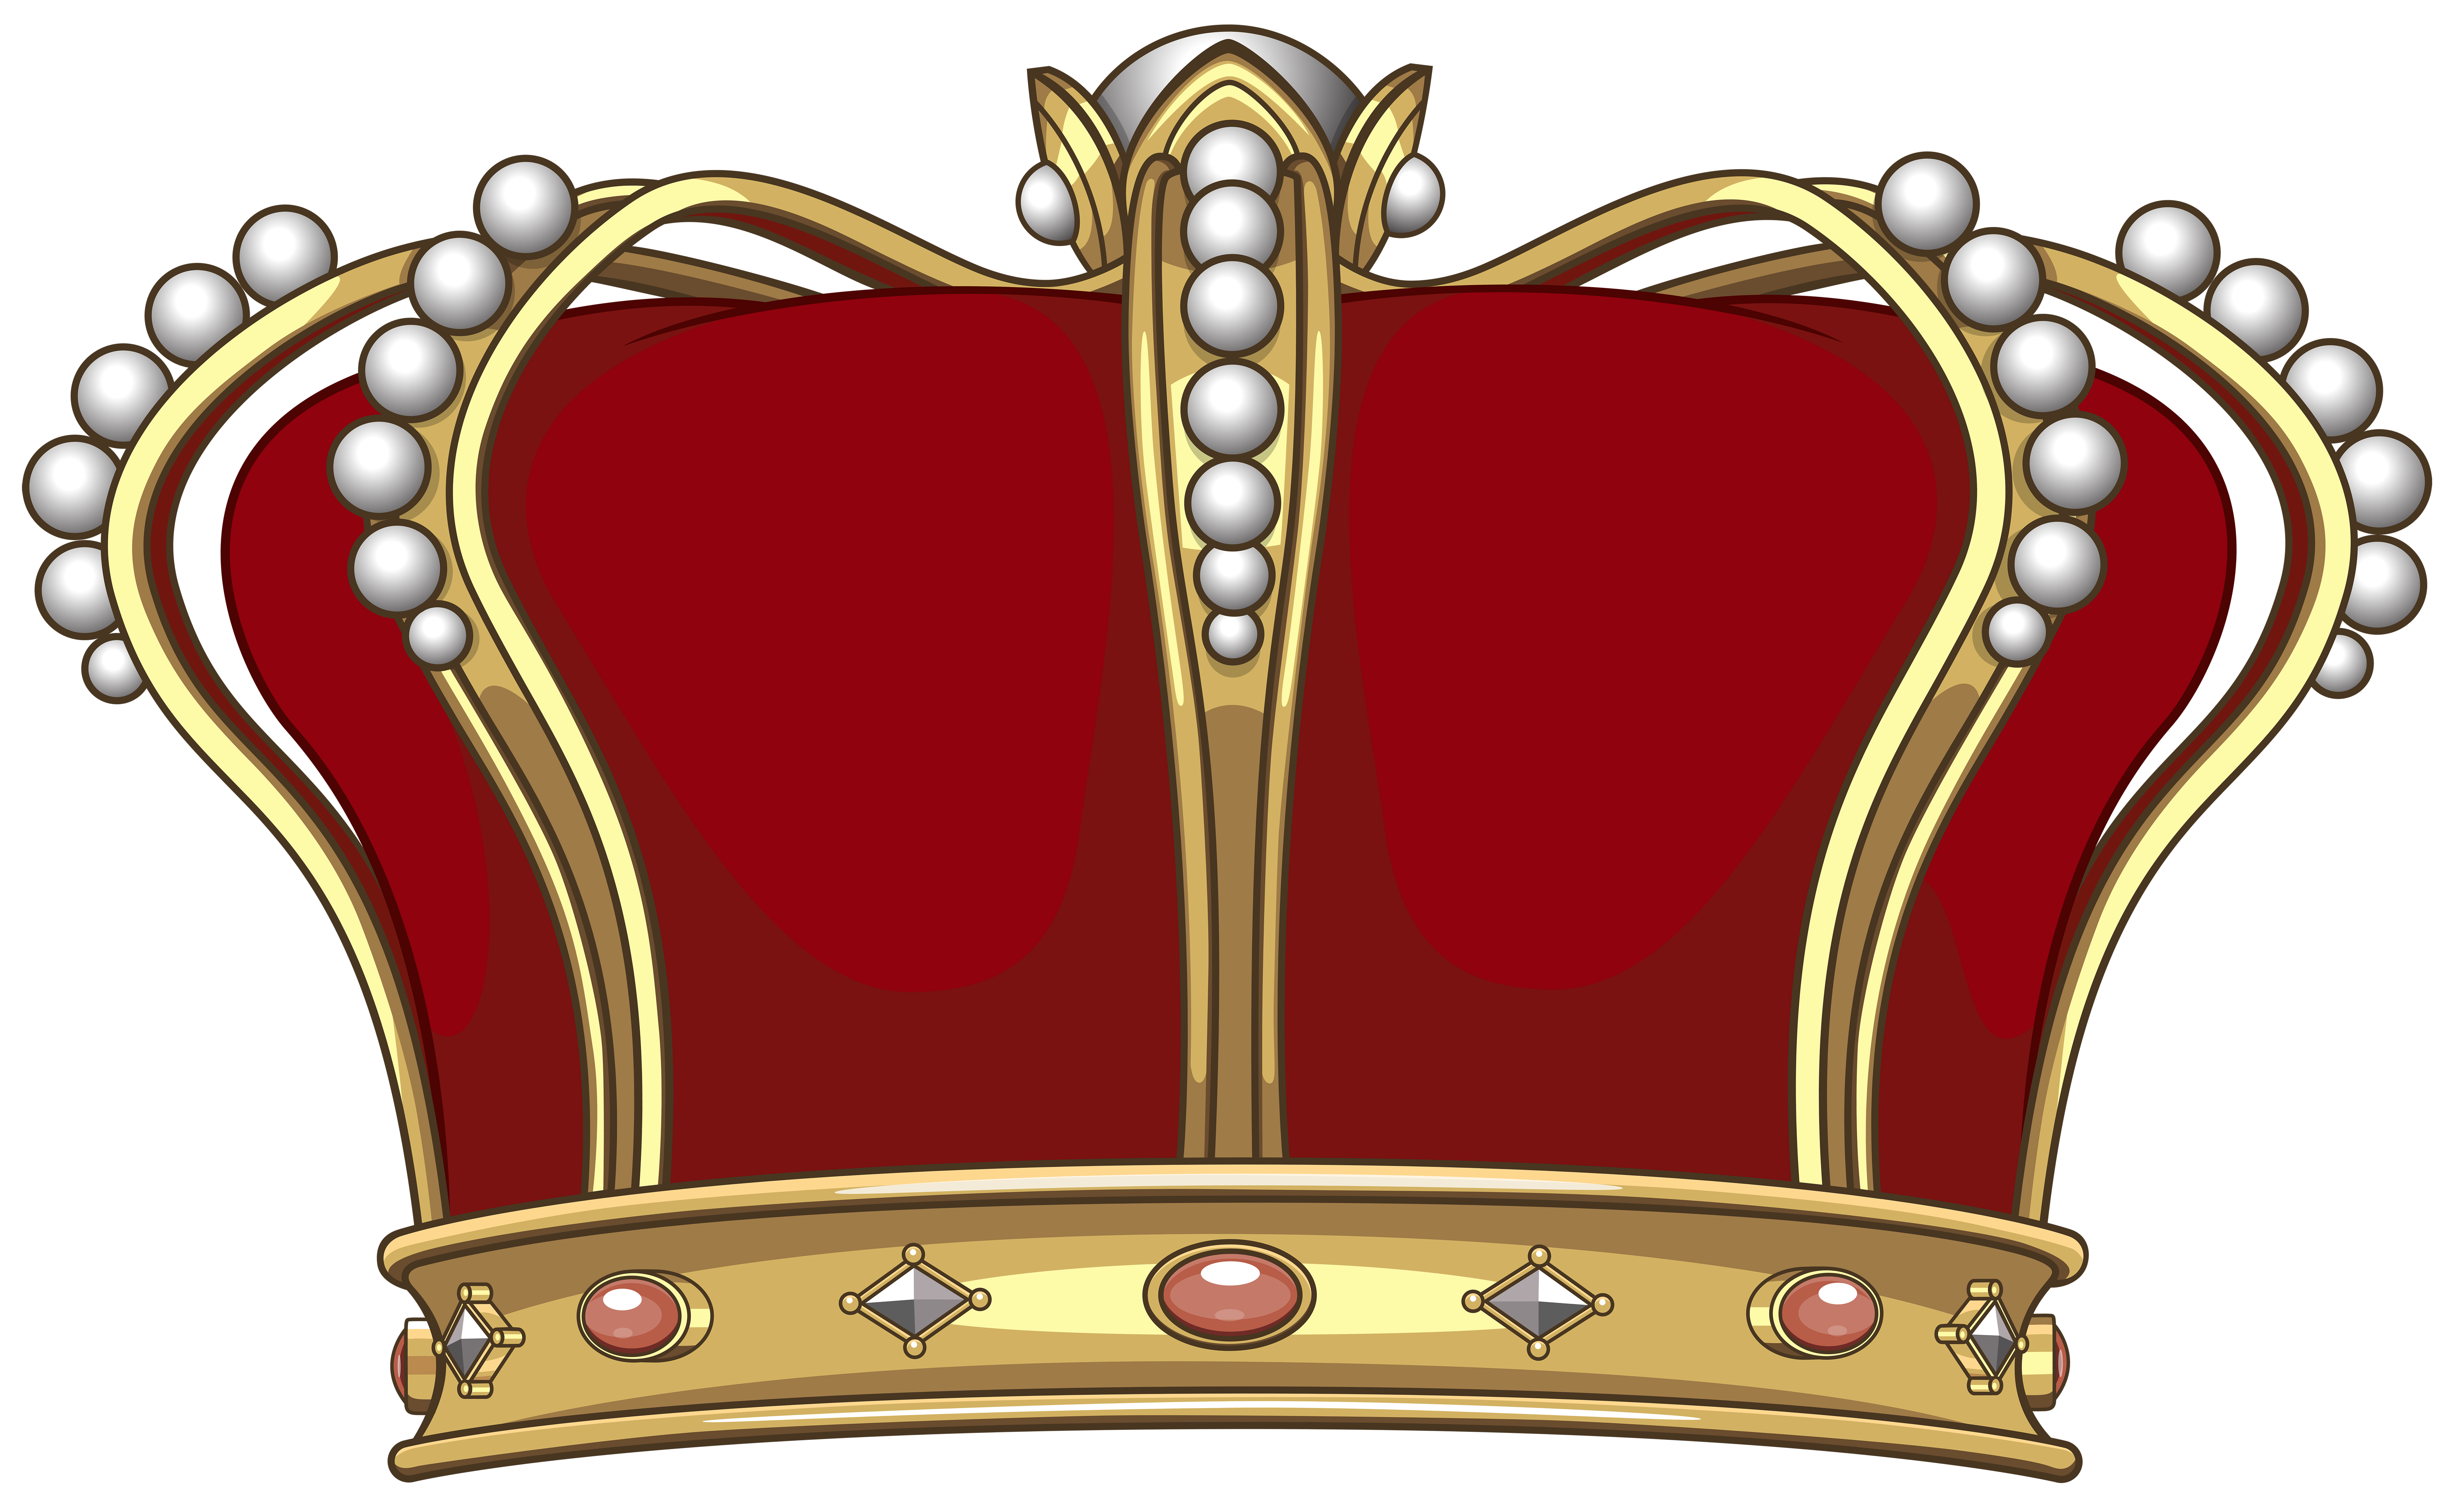 clip art of a king's crown - photo #42